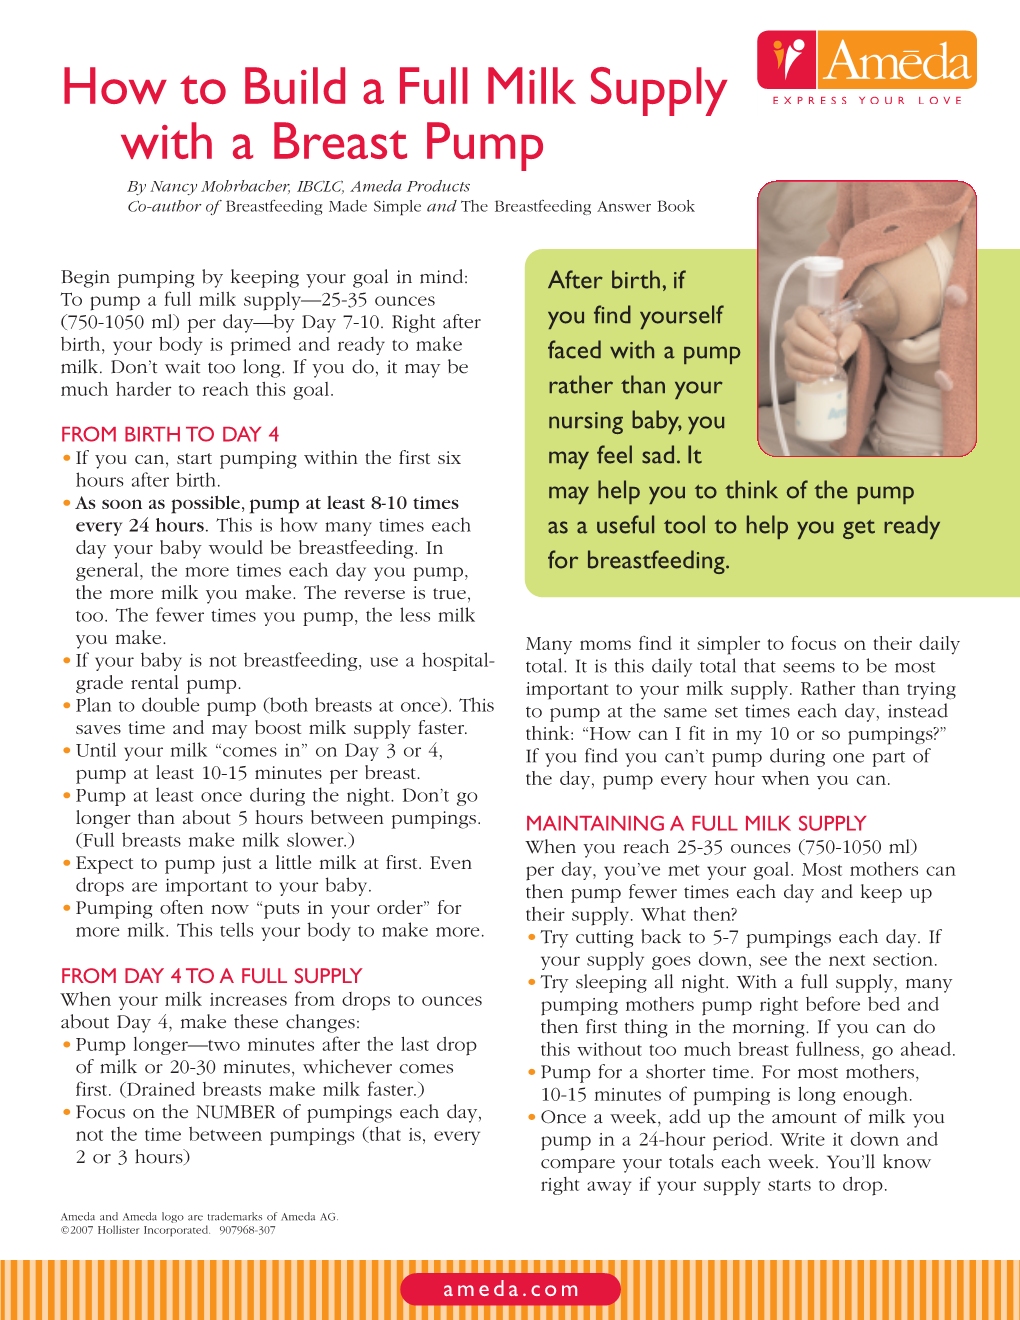 How to Build a Full Milk Supply with a Breast Pump by Nancy Mohrbacher, IBCLC, Ameda Products Co-Author of Breastfeeding Made Simple and the Breastfeeding Answer Book